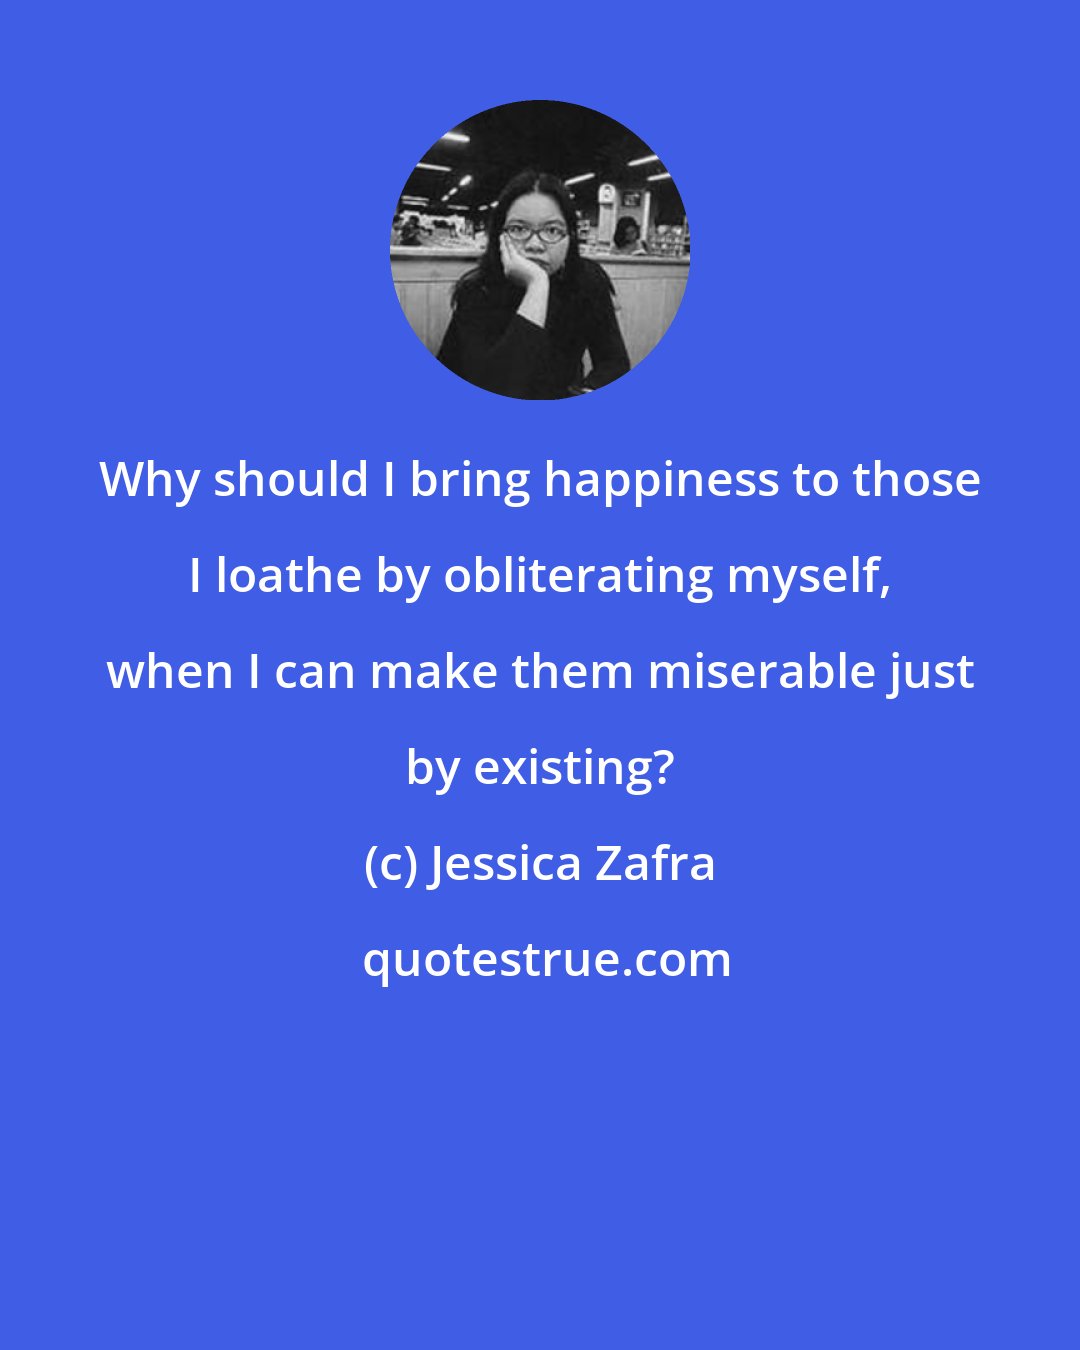 Jessica Zafra: Why should I bring happiness to those I loathe by obliterating myself, when I can make them miserable just by existing?